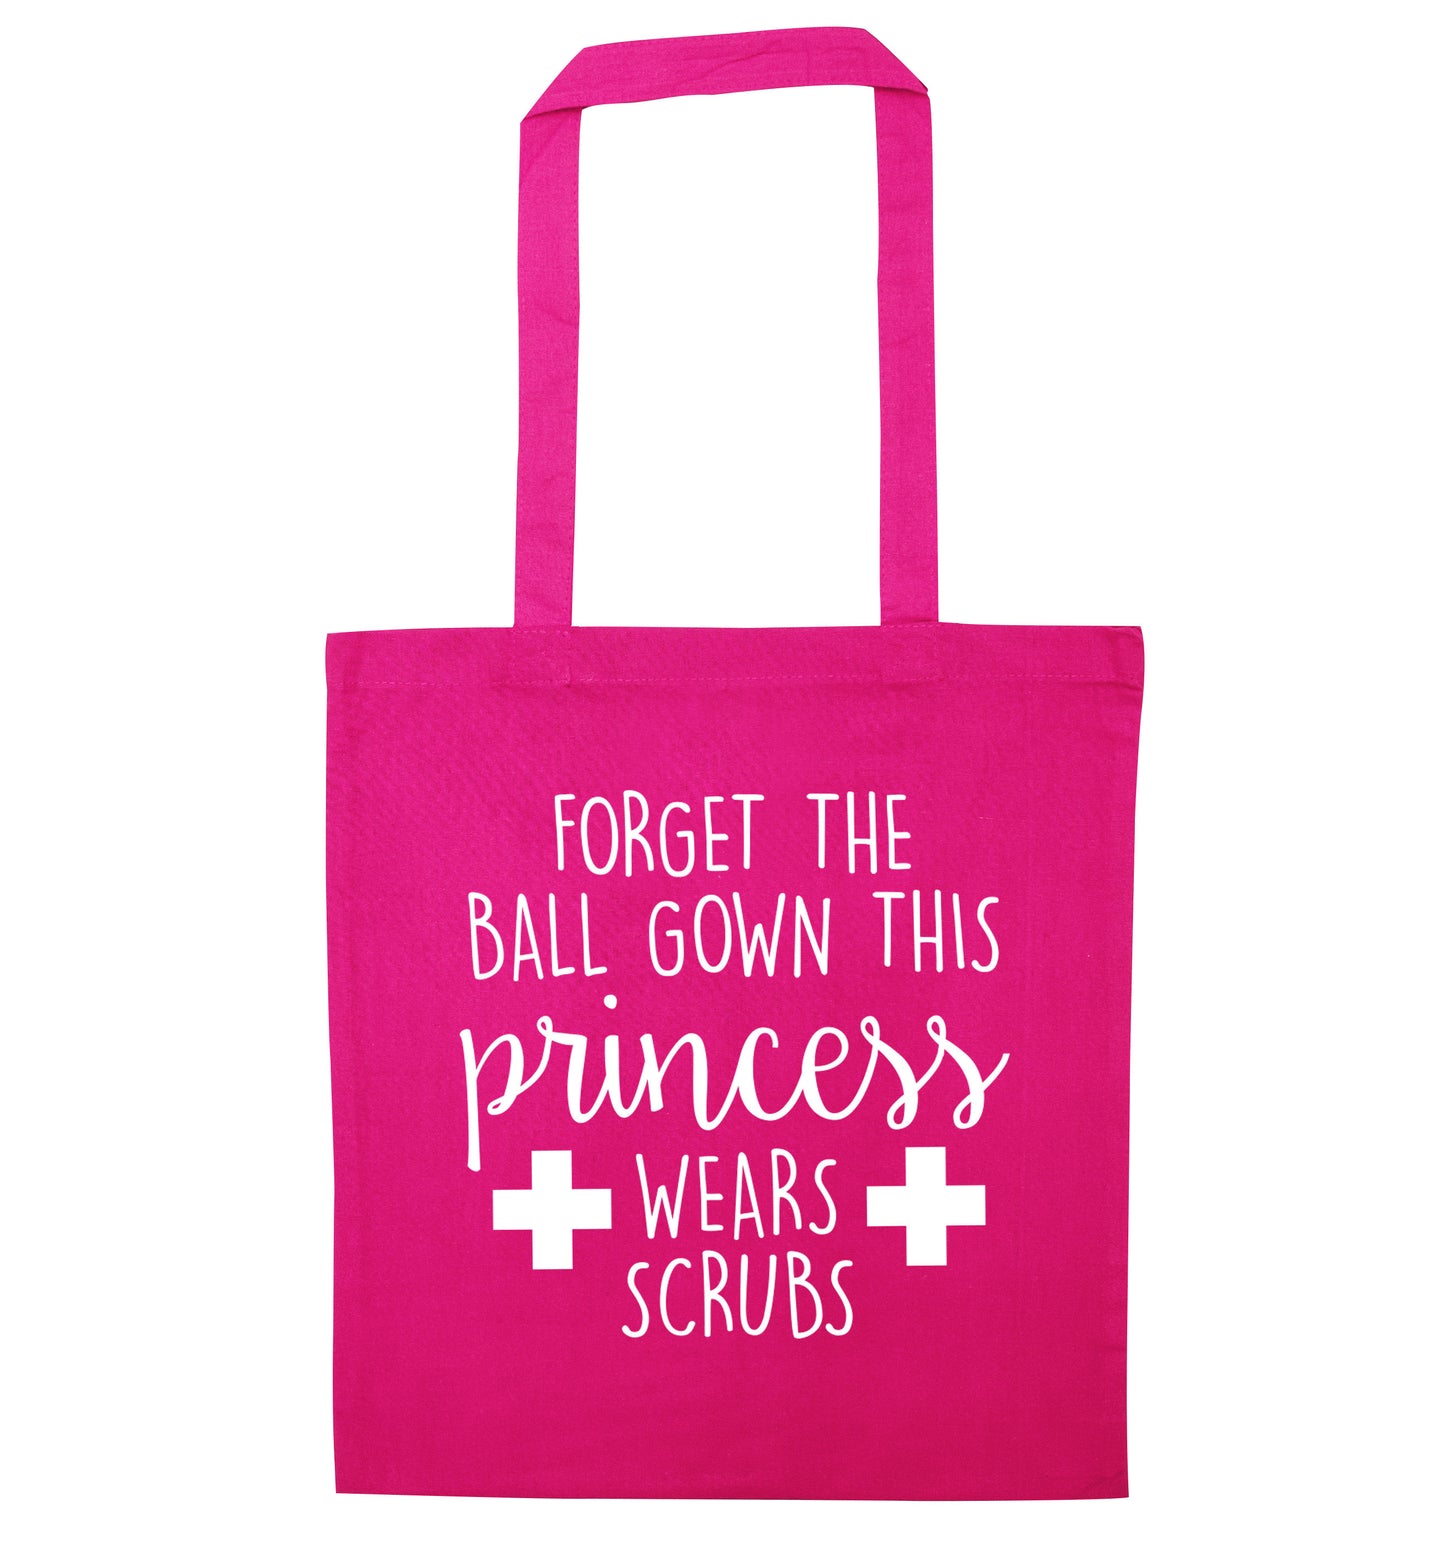 Forget the ball gown this princess wears scrubs pink tote bag